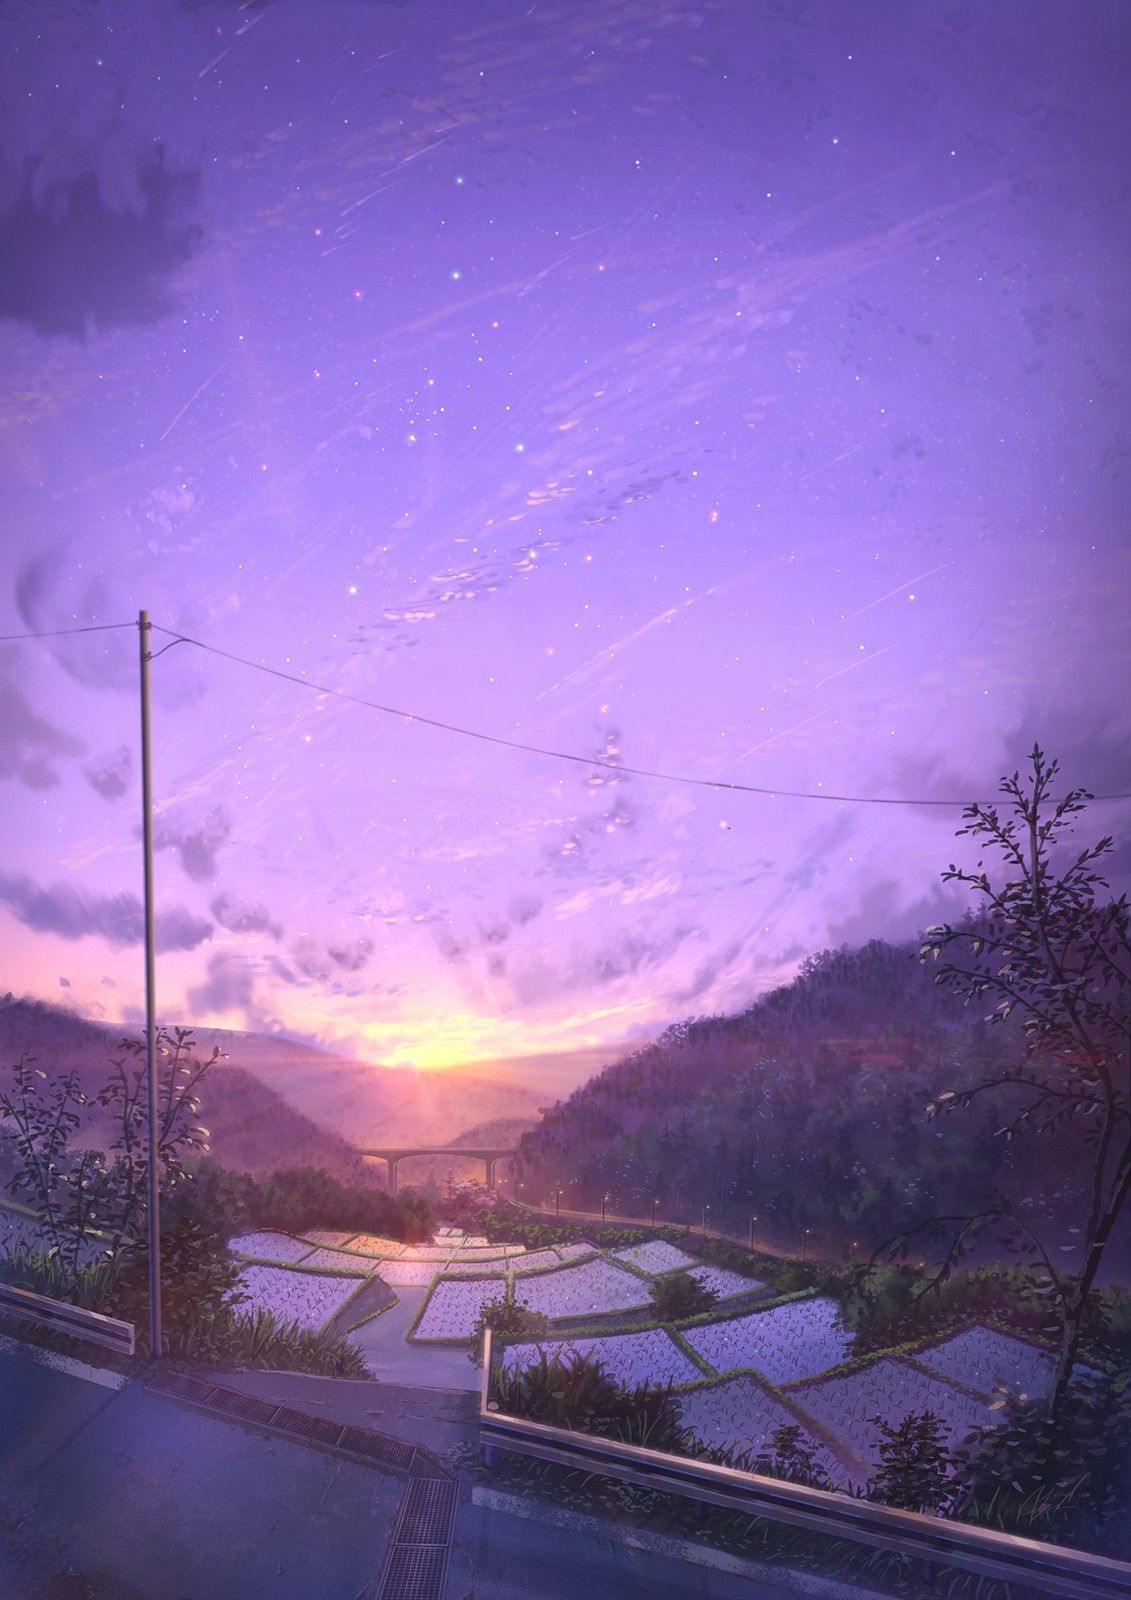 Aesthetic anime scenery wallpaper for phone. A purple sky with stars, the sun rising in the distance, and a field of rice. - Anime sunset, anime